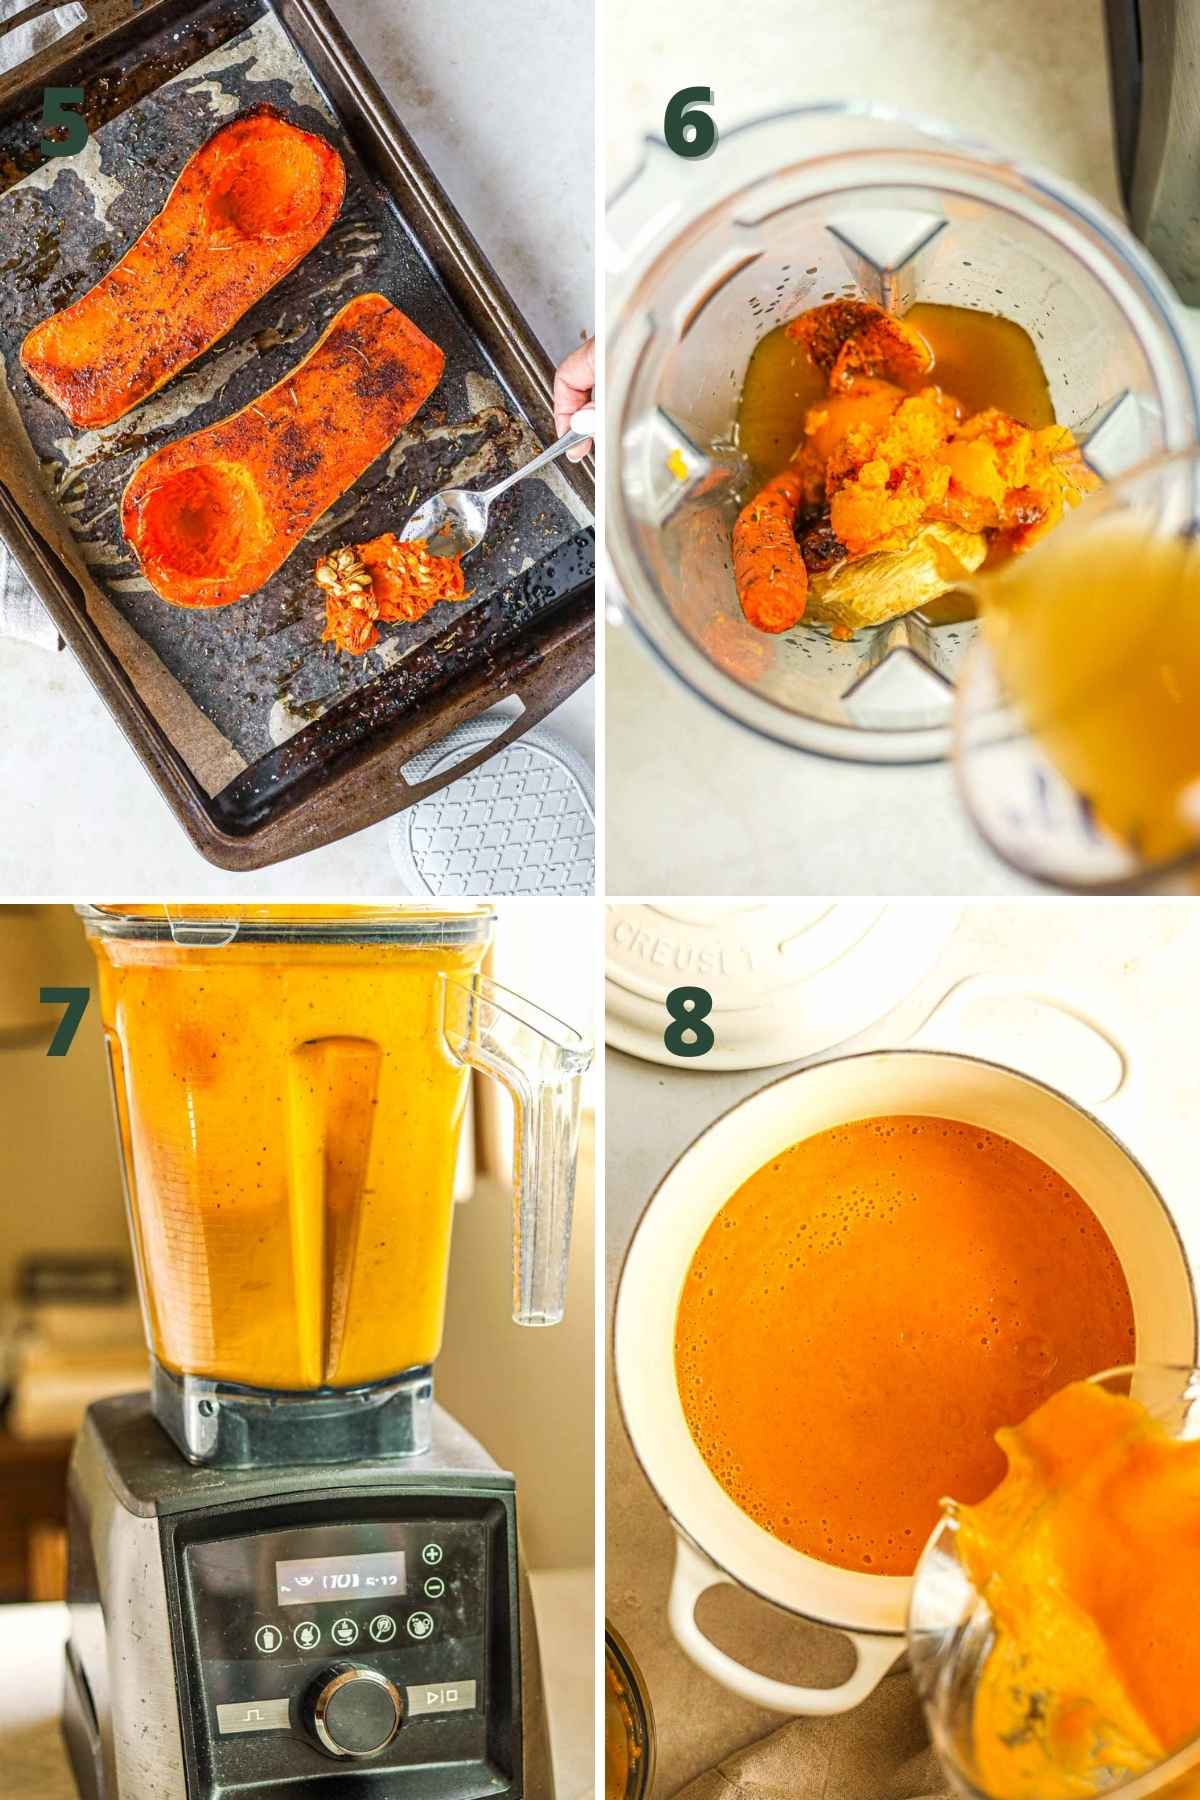 Steps to make butternut squash soup in a blender, including removing the seeds from the butternut squash, adding the vegetables and broth to a Vitamix, blending the ingredients, and pouring the soup into a pot to warm on the stove.